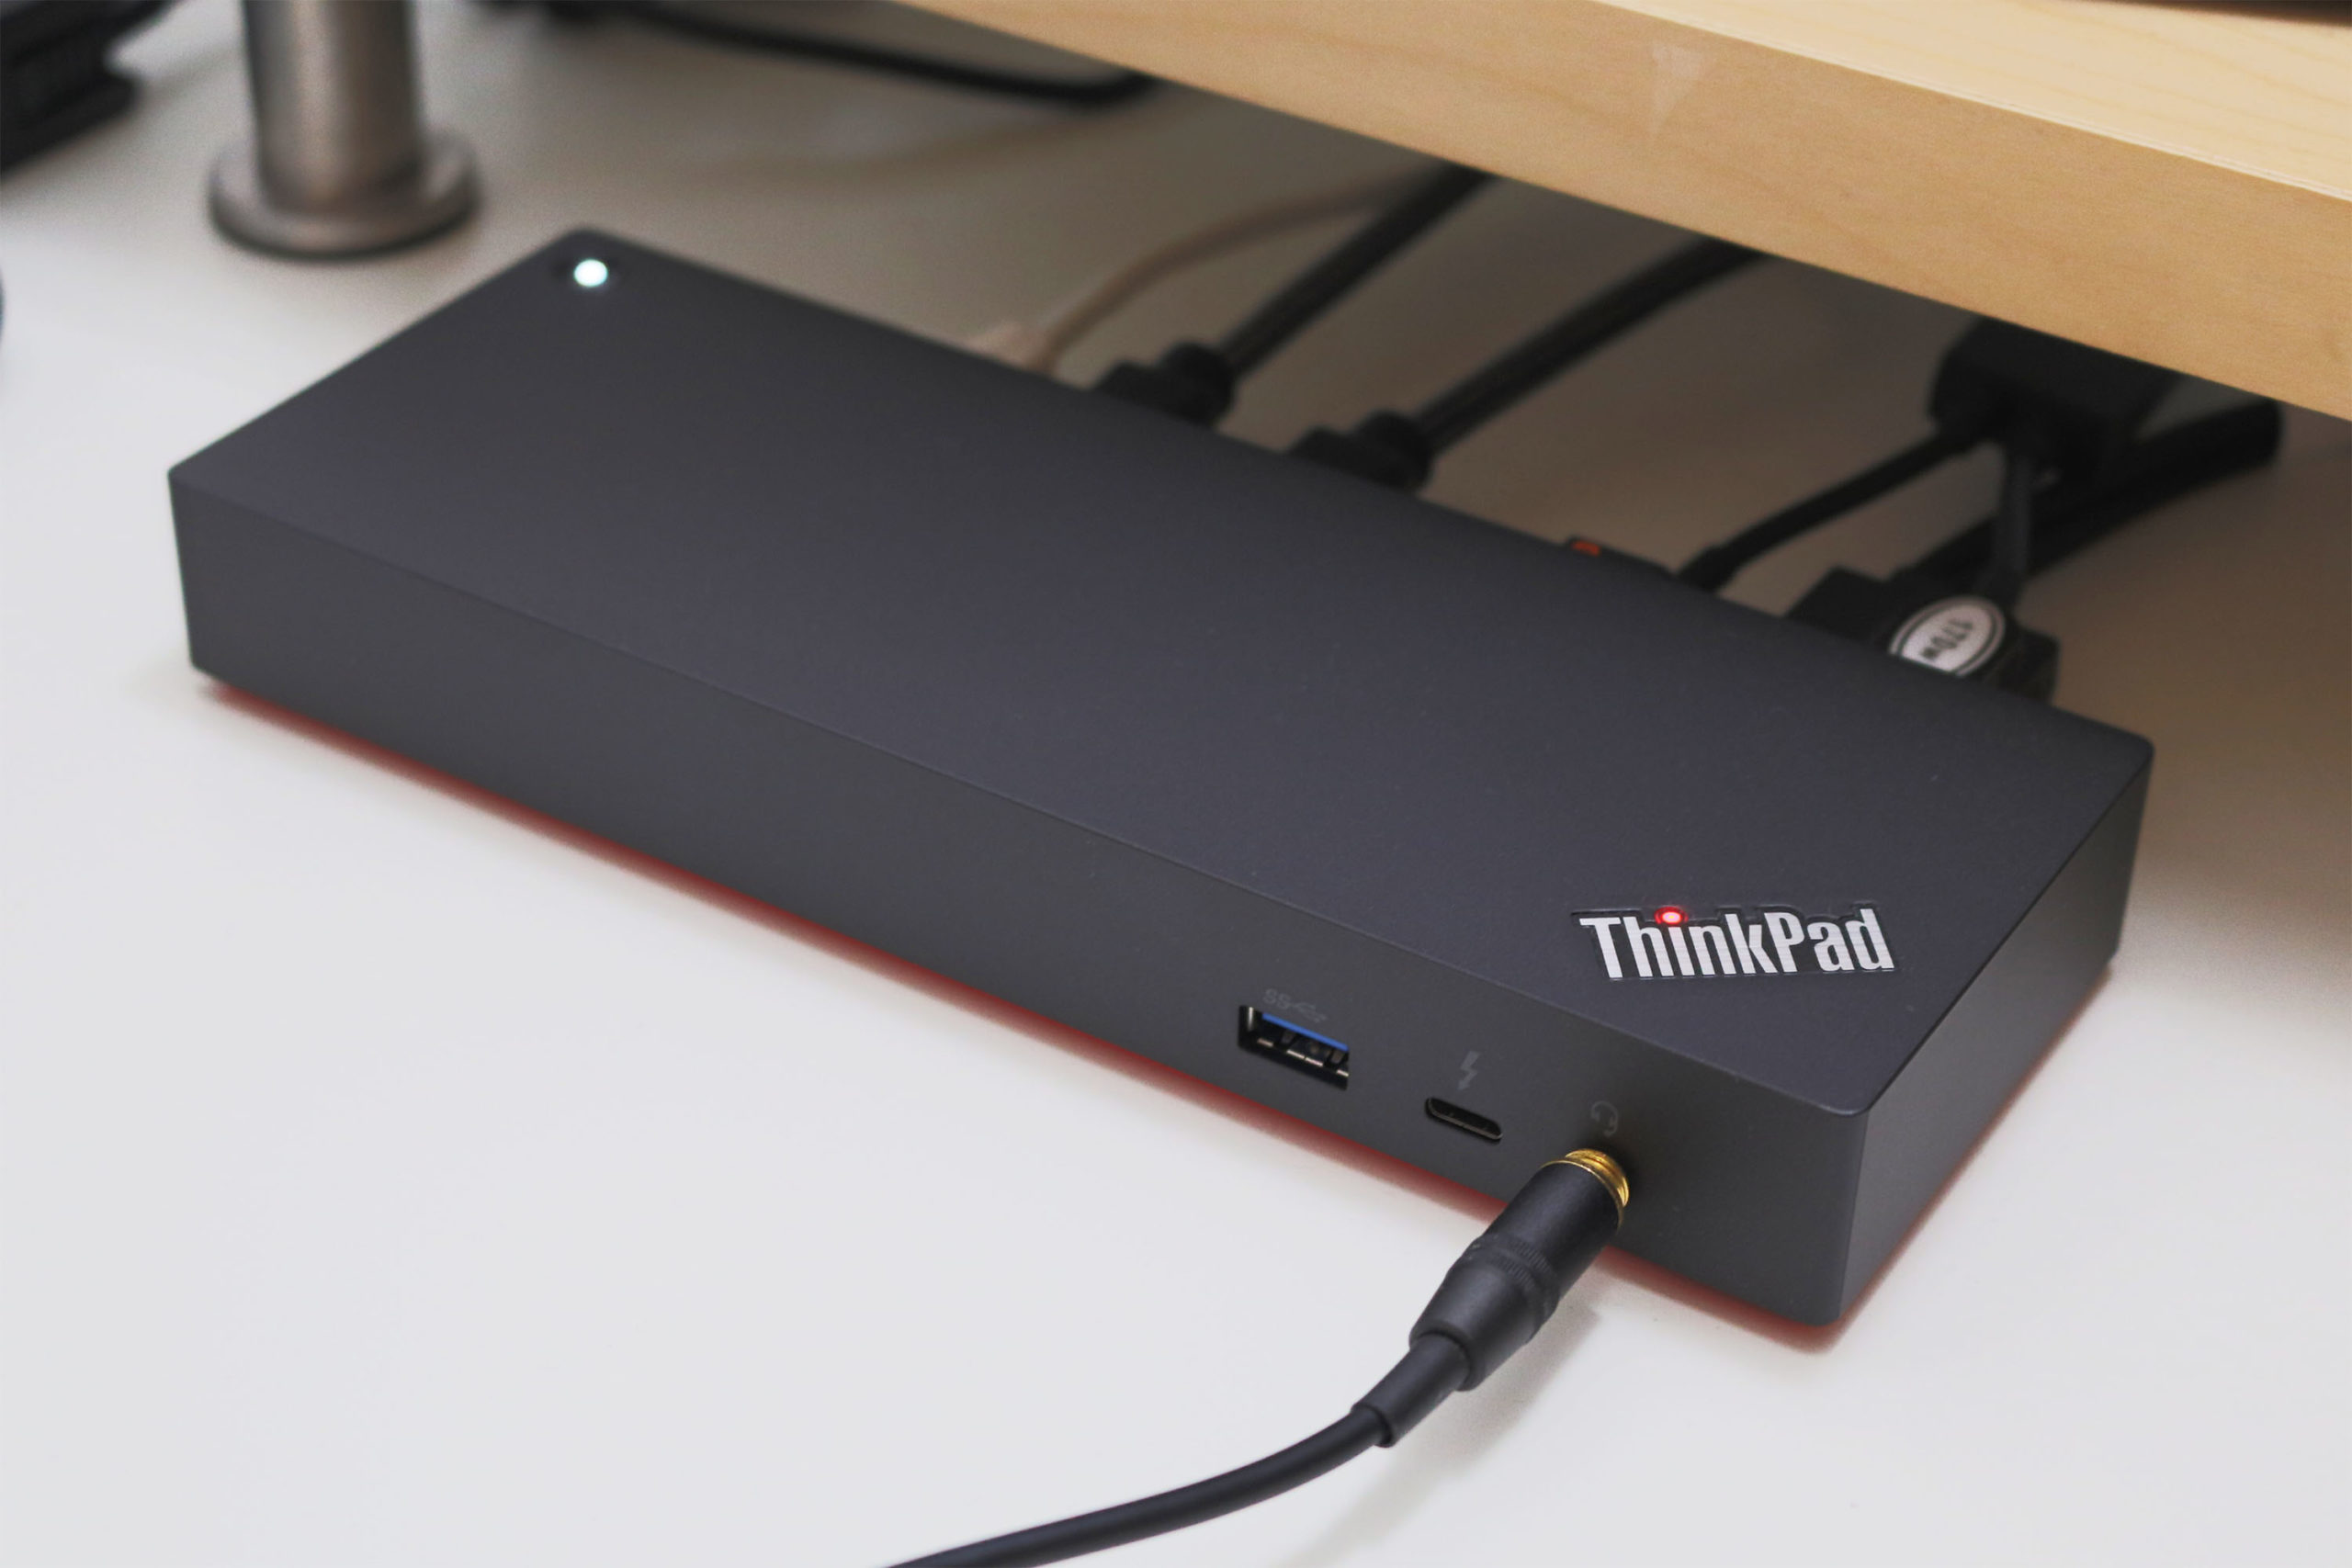 Troubleshooting Sound Issues On Lenovo Docking Station: A Practical Guide